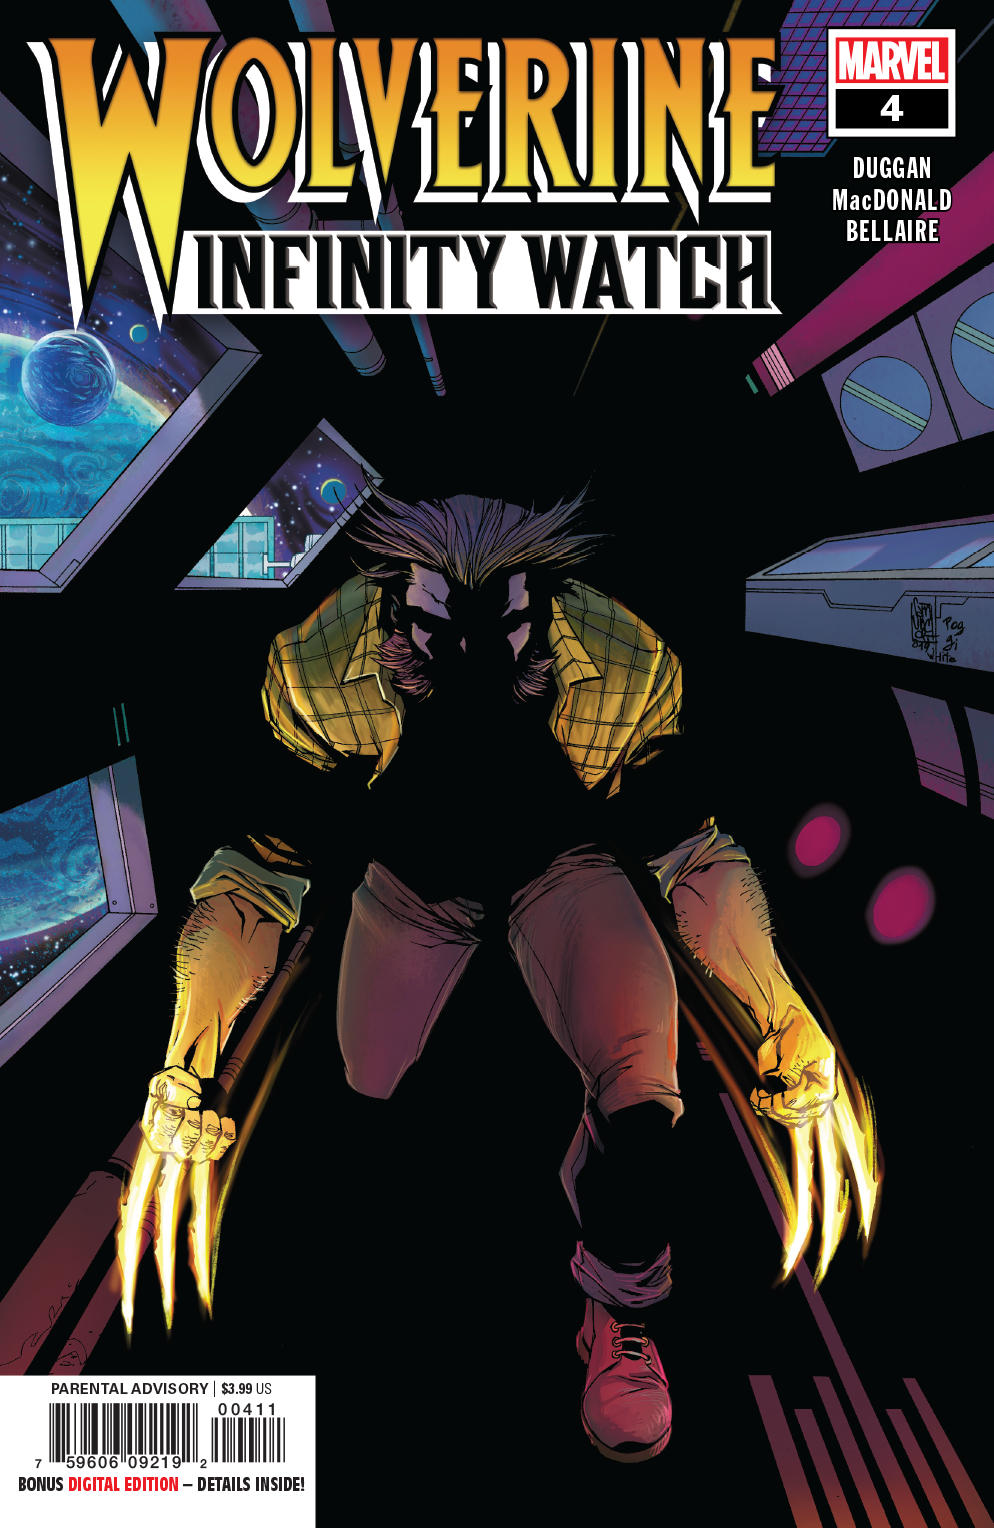 Wolverine: Infinity Watch no. 4 (4 of 5) (2019 Series)